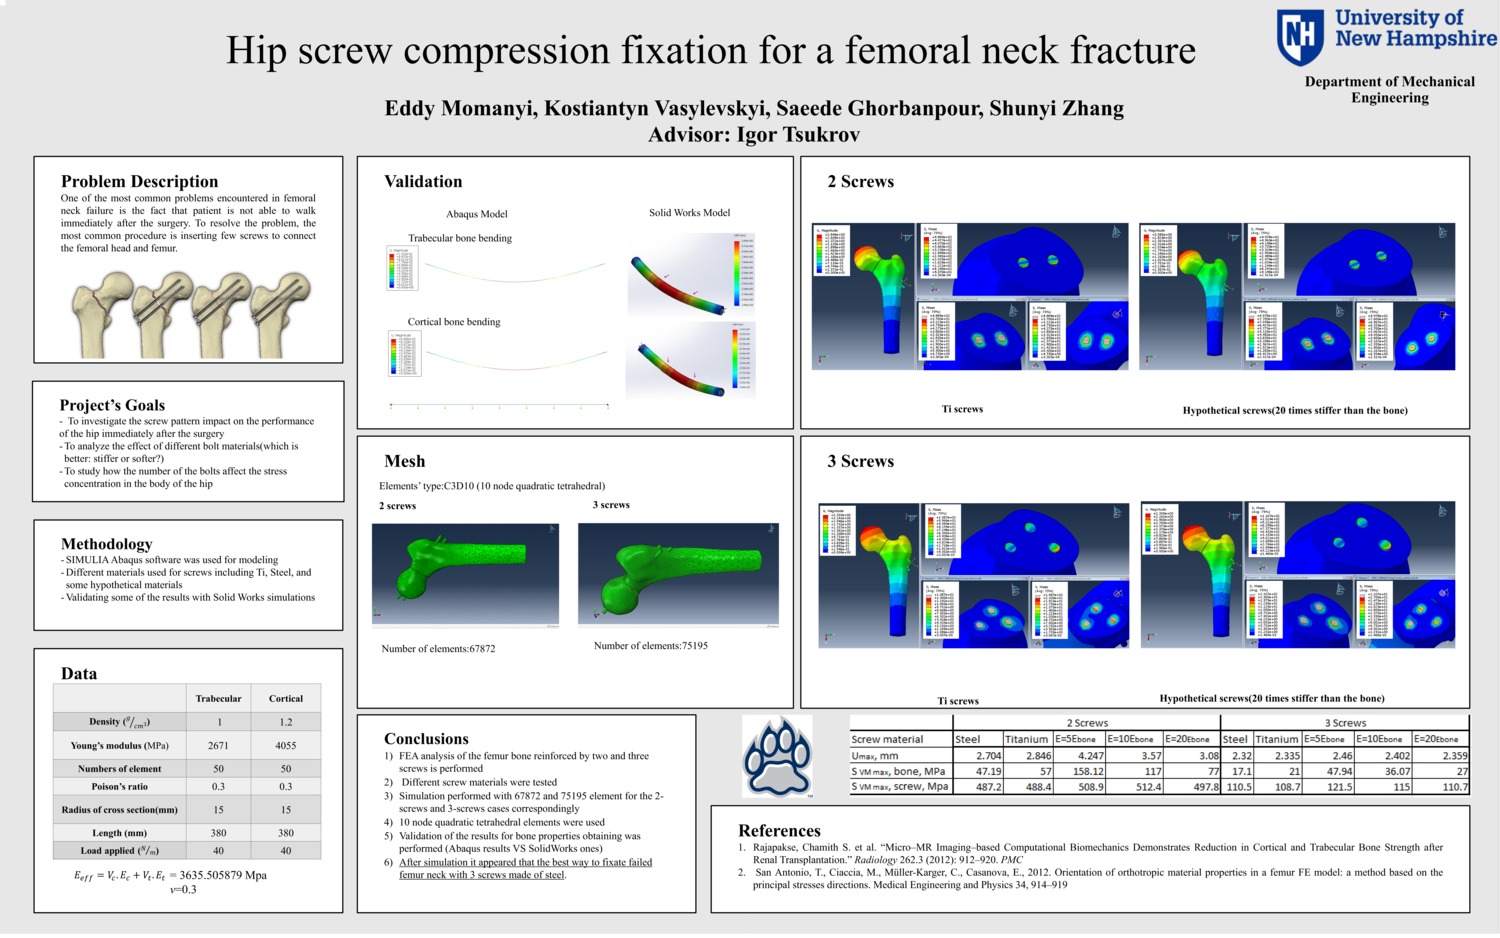 Hip Screw Compression Fixation For A Femoral Neck Fracture by kv1012